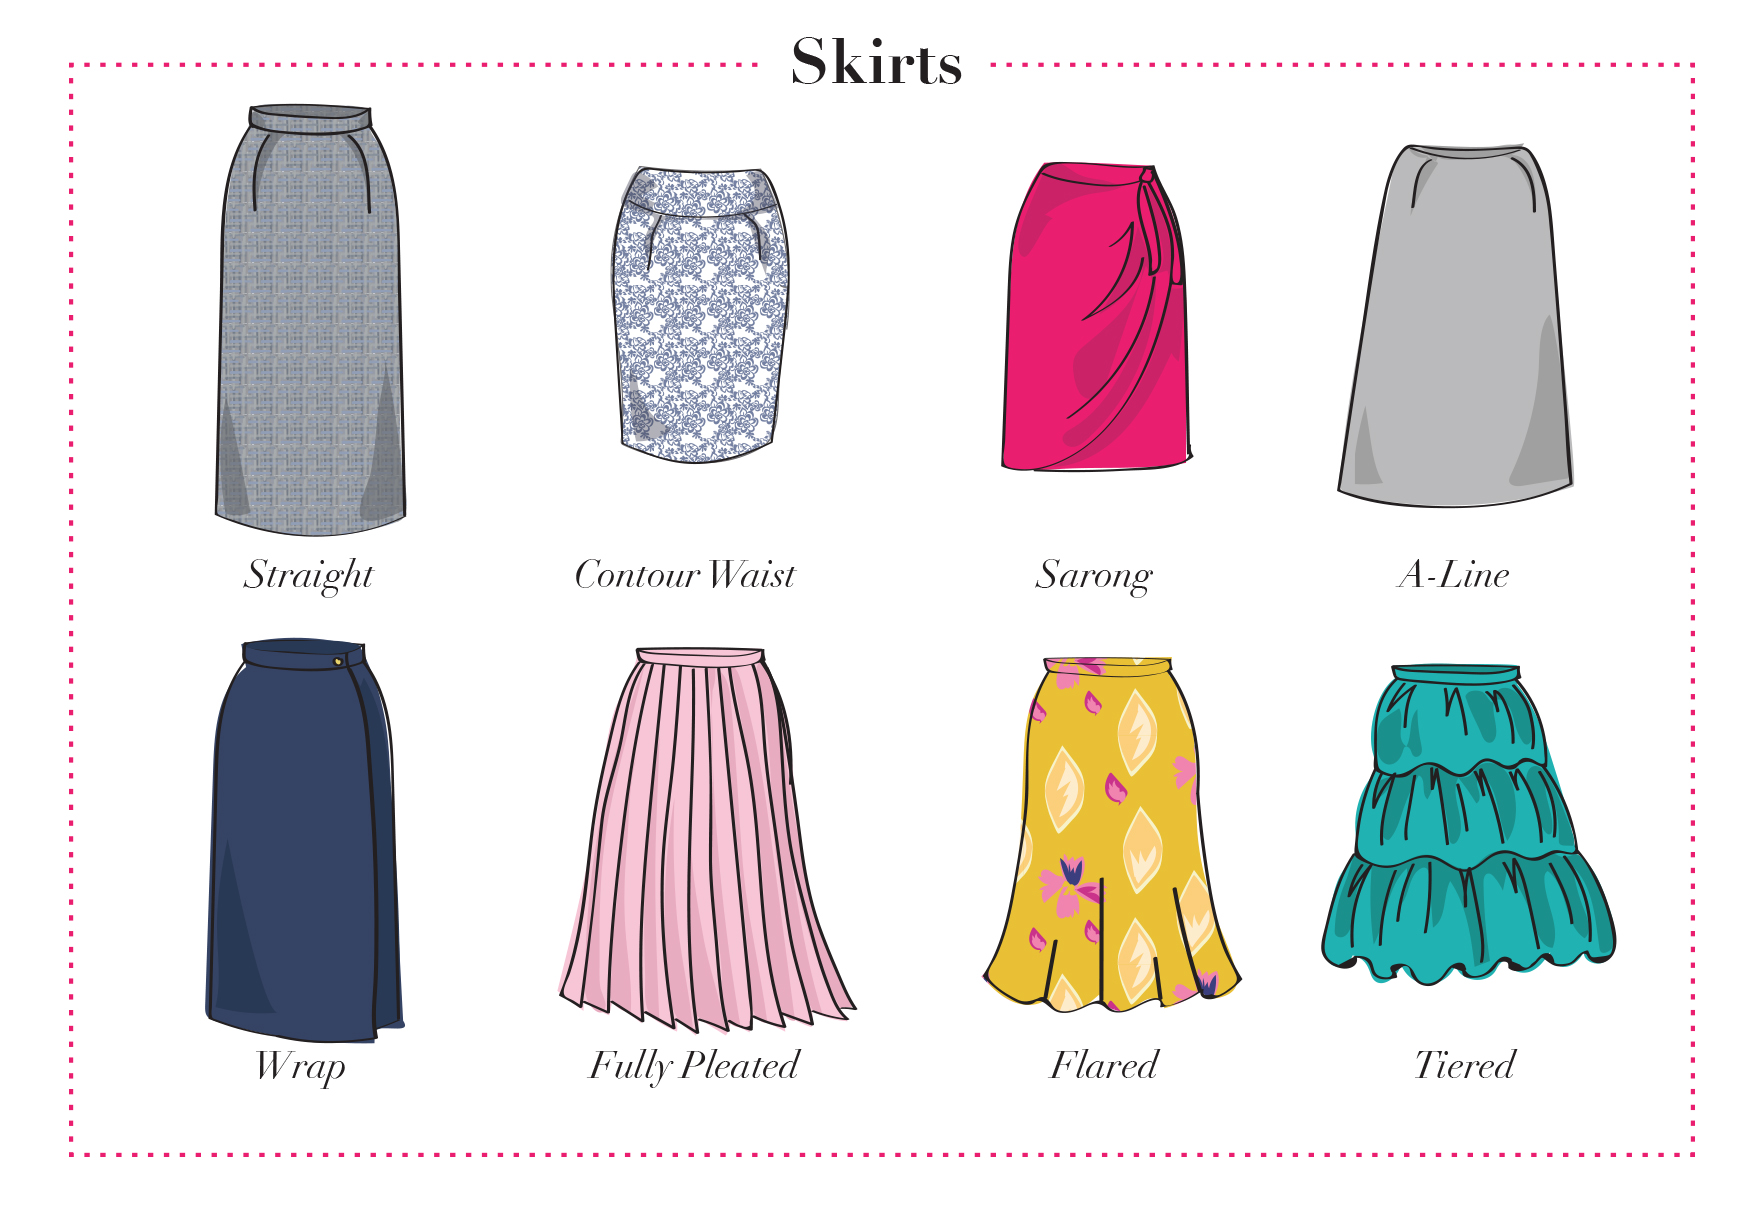 The Guide to Easy Dressing - Skirts and Jackets - Image Intelligence